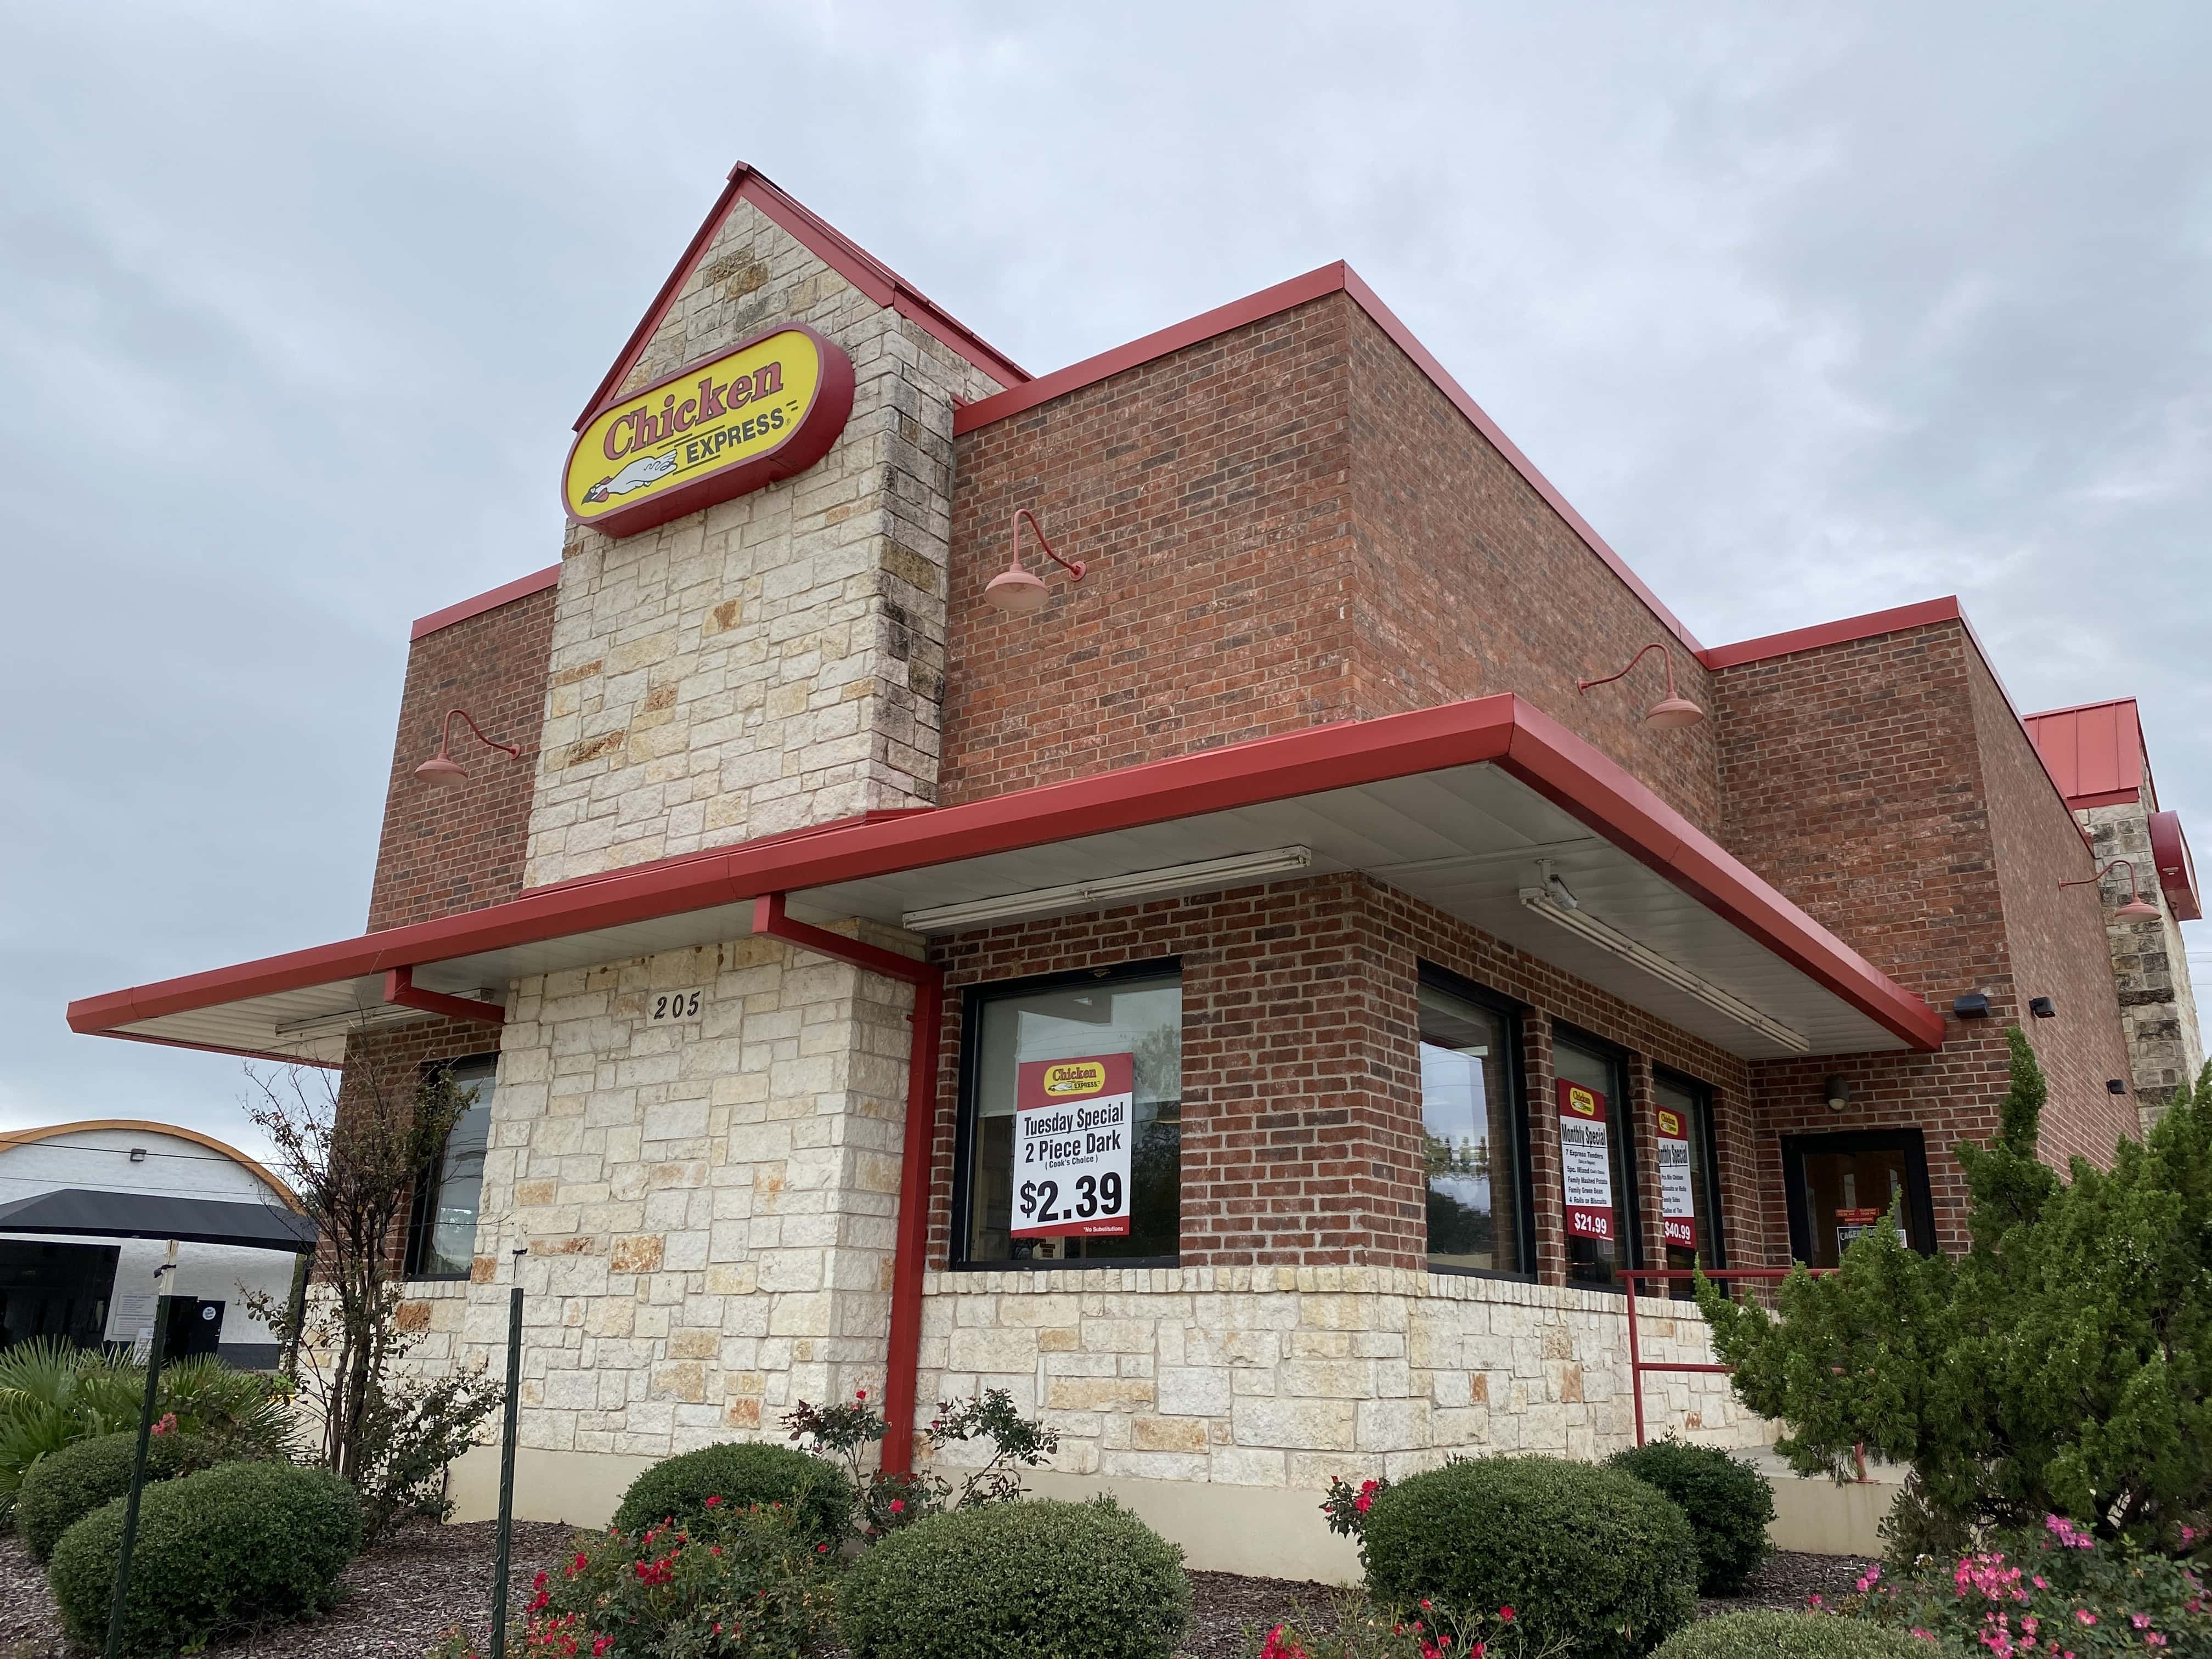 Chicken Express - Marshall (TX 75670), US, best lunch places near me